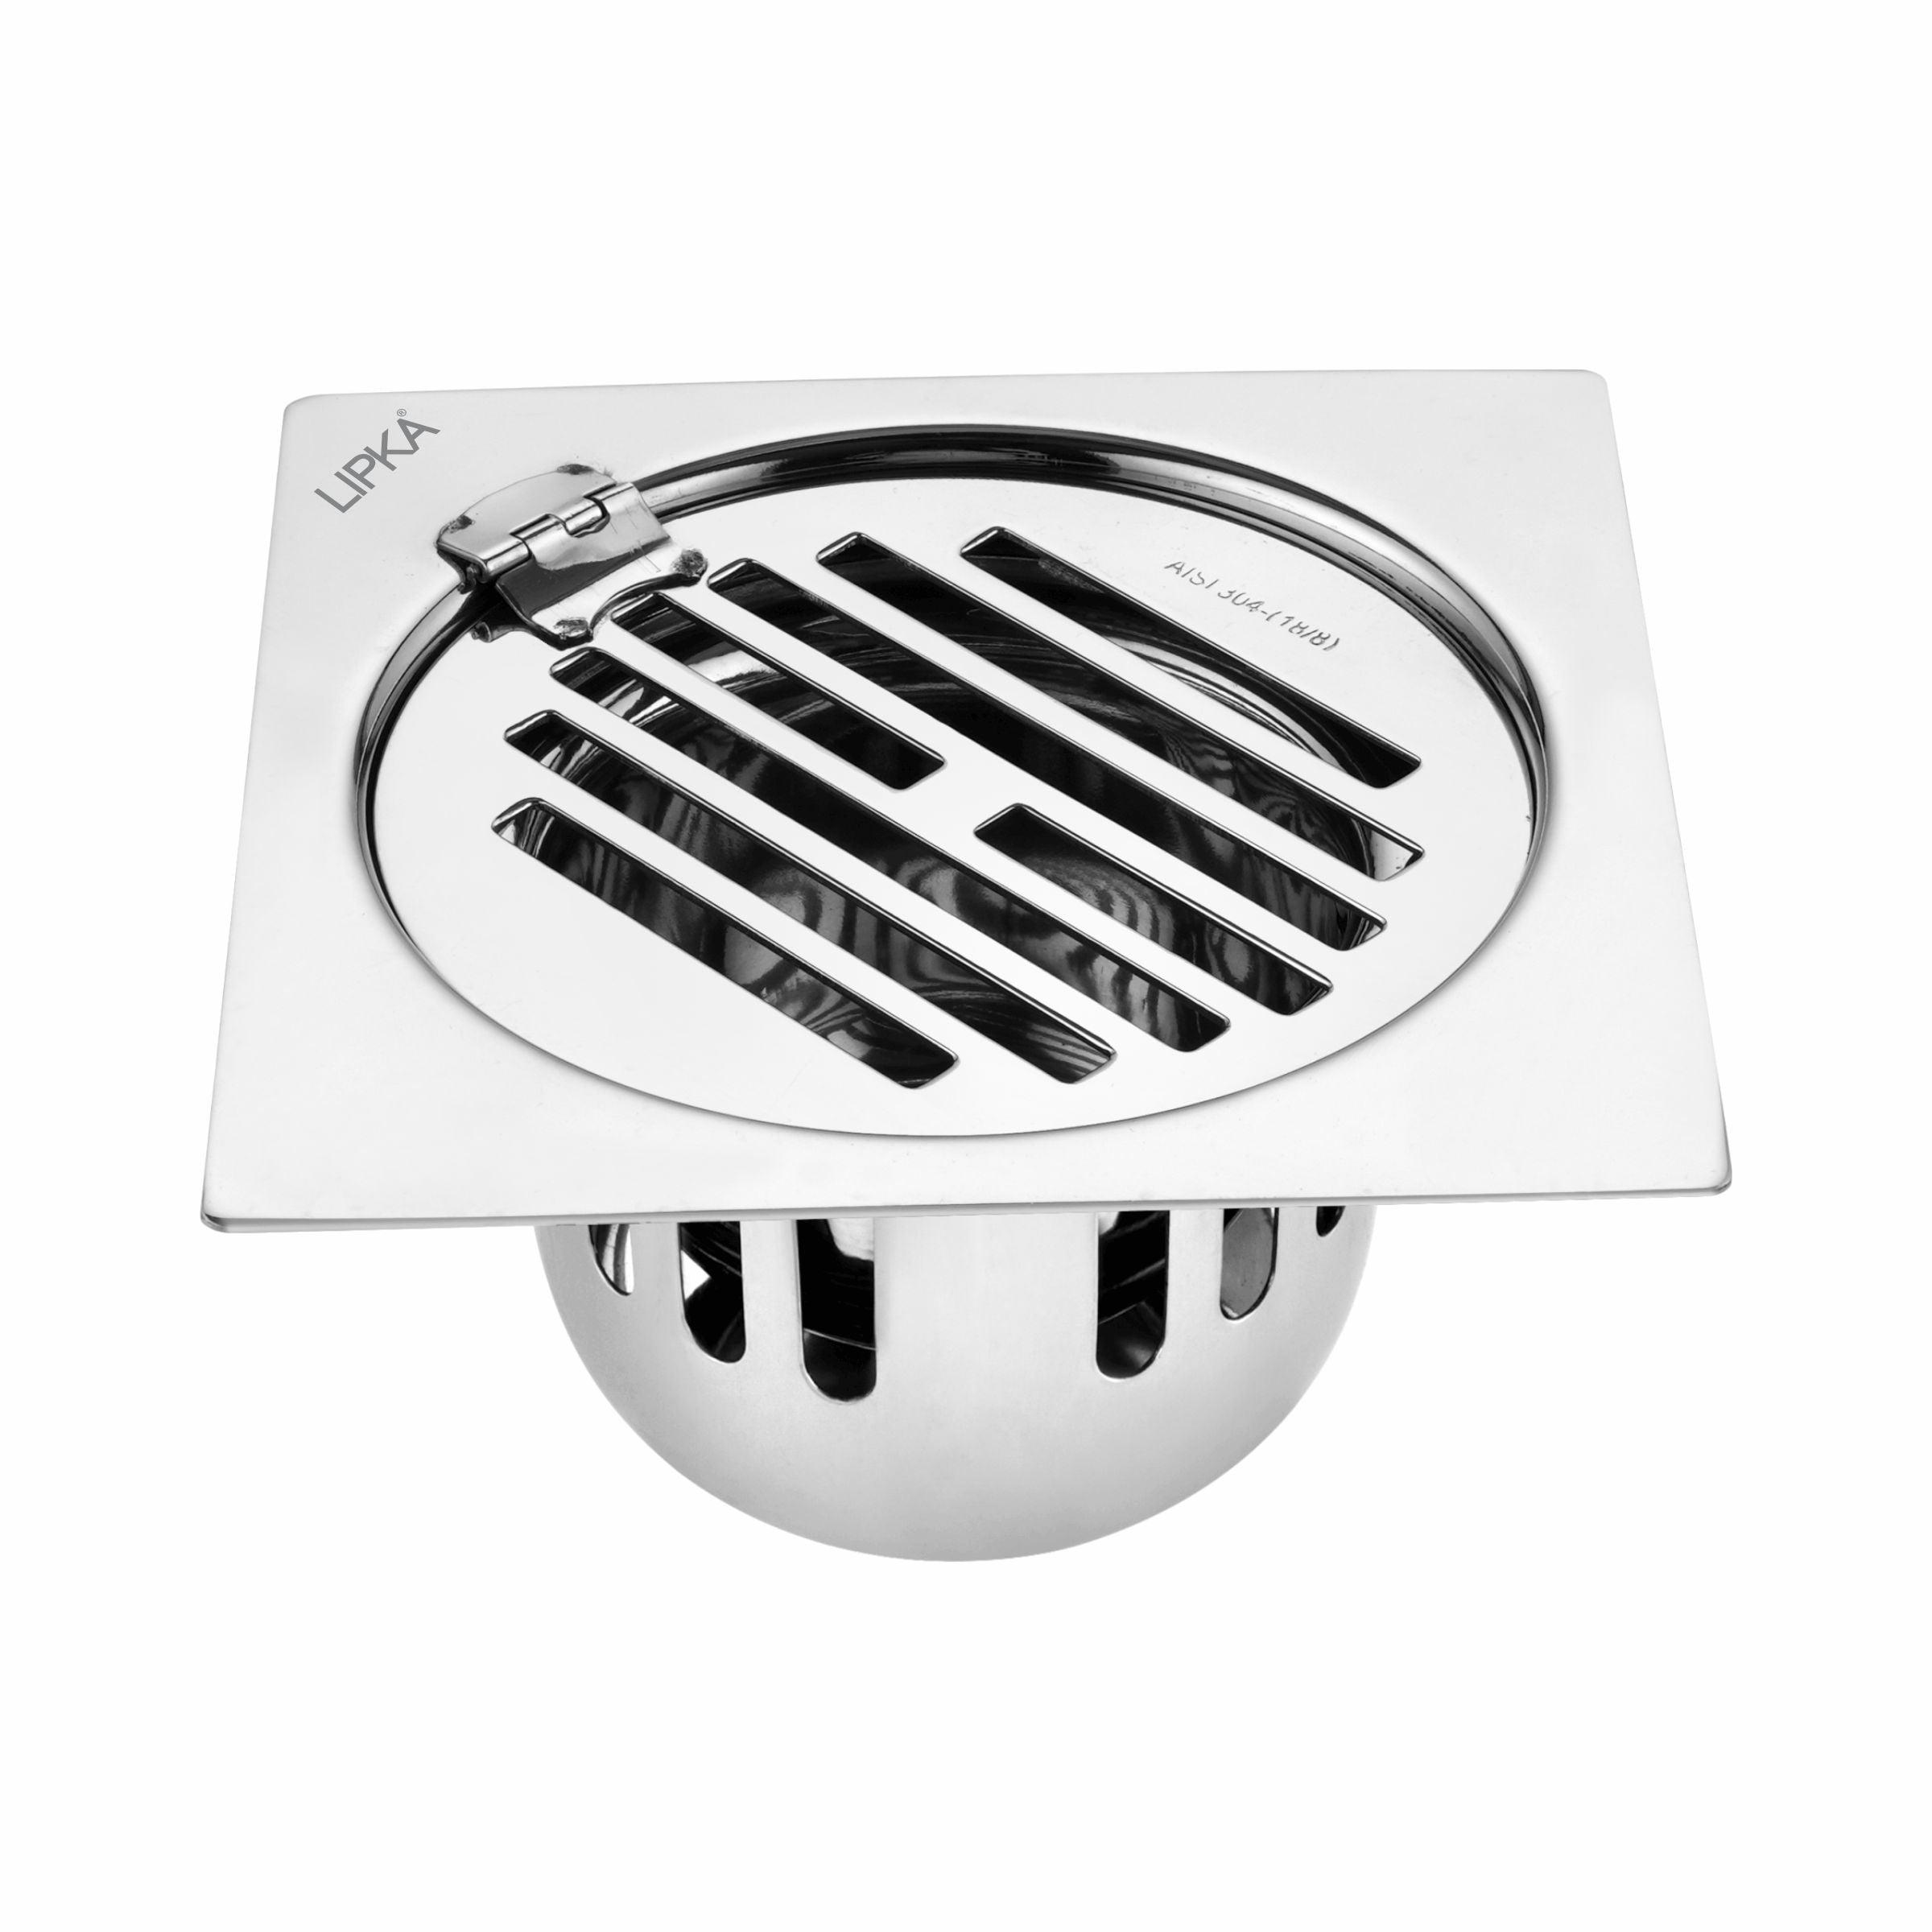 Golden Classic Jali Square Flat Cut Floor Drain (5 x 5 Inches) with Hinge and Cockroach Trap - LIPKA - Lipka Home